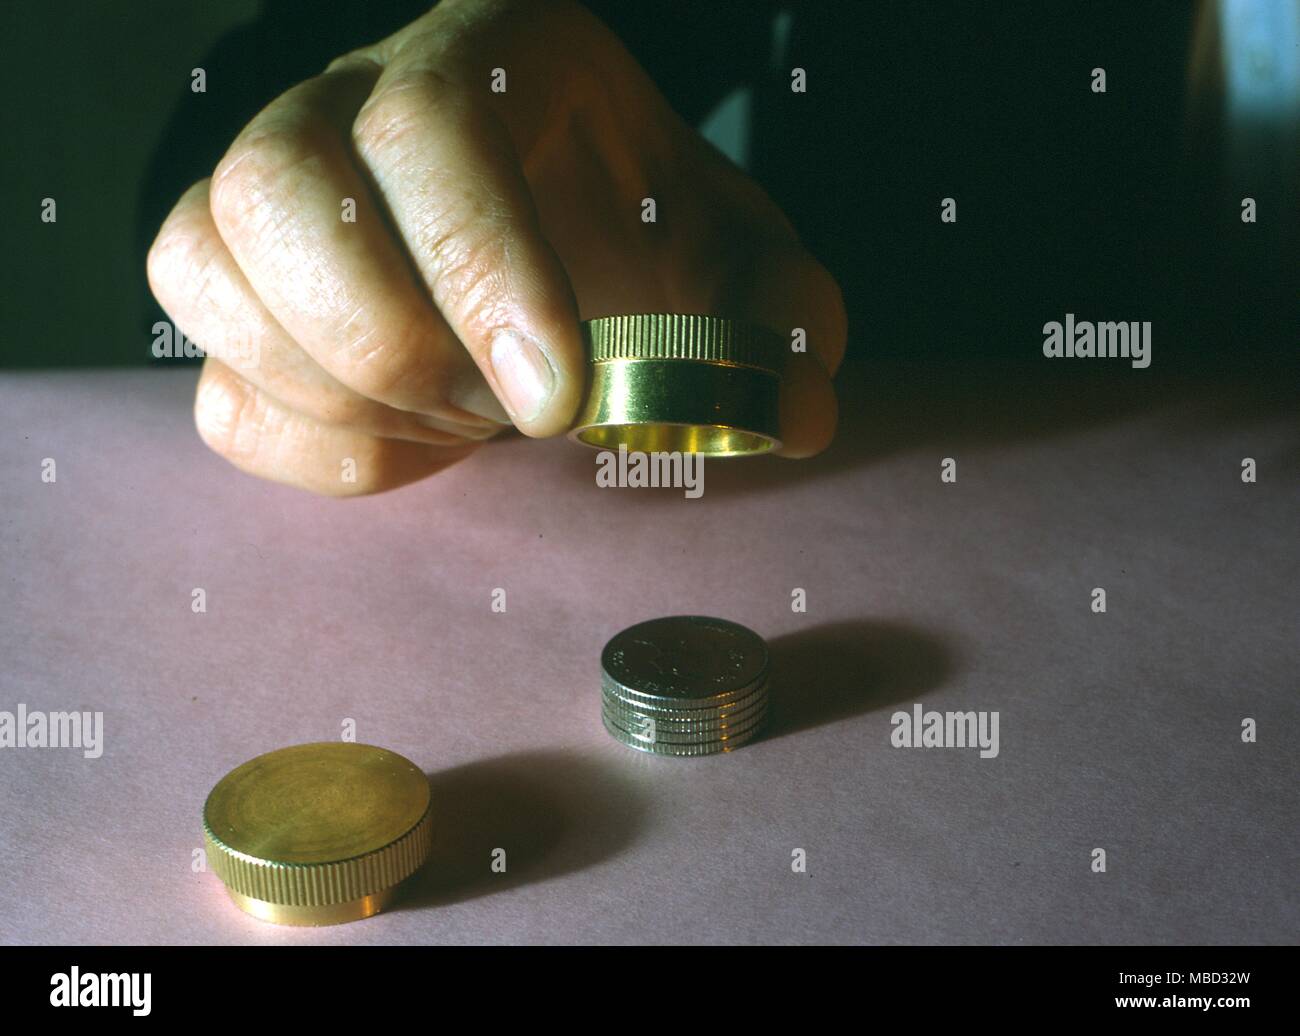 Stage Magic - Marvin's Magical Coins. Magician prepares to make coins vanish. Stock Photo